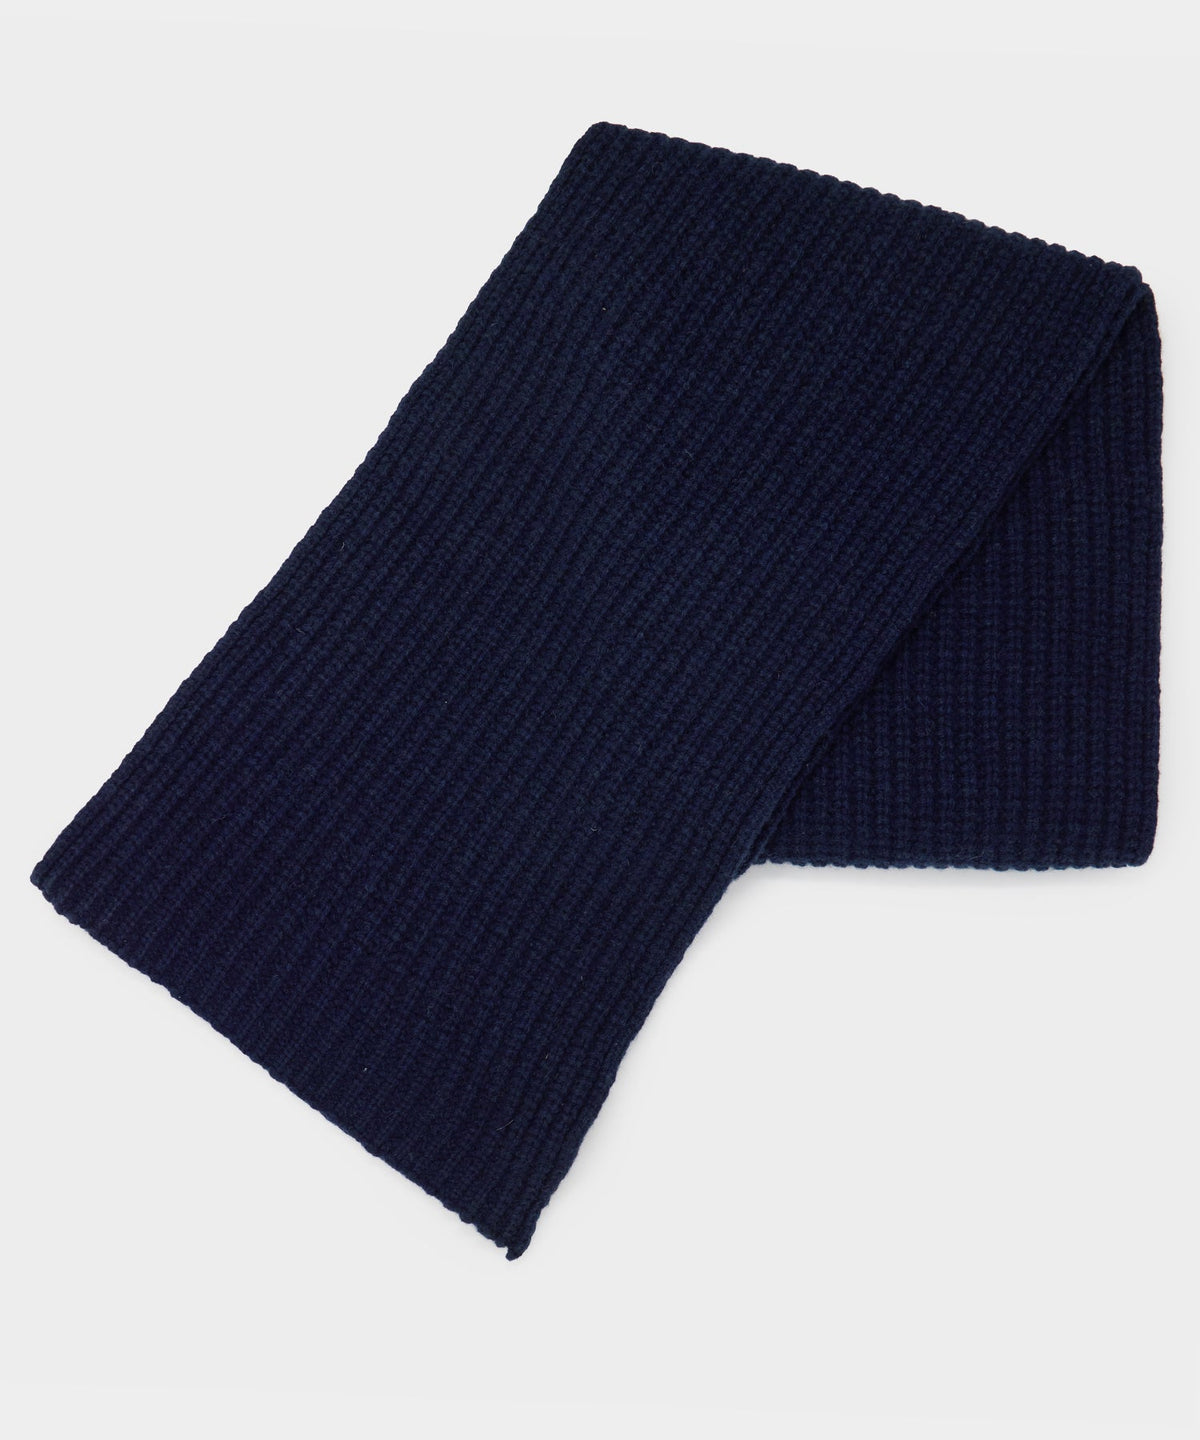 Recycled Cashmere Scarf Half Cardigan Stitch in Navy